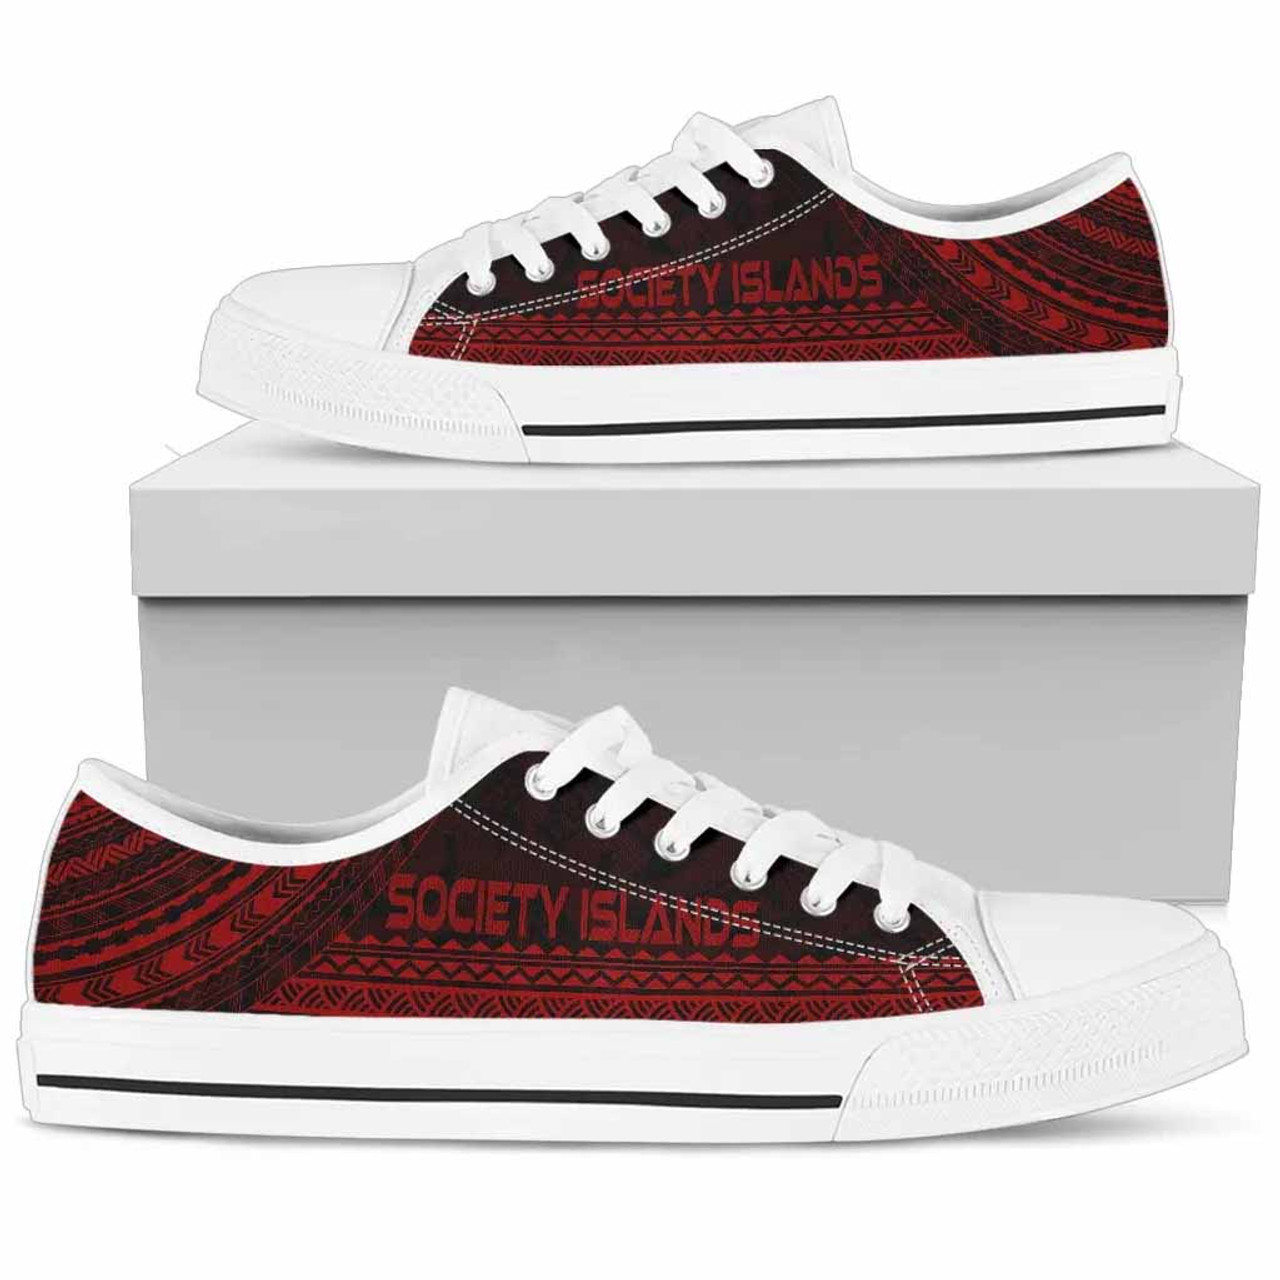 Society Islands Low Top Shoes - Polynesian Red Chief Version 3